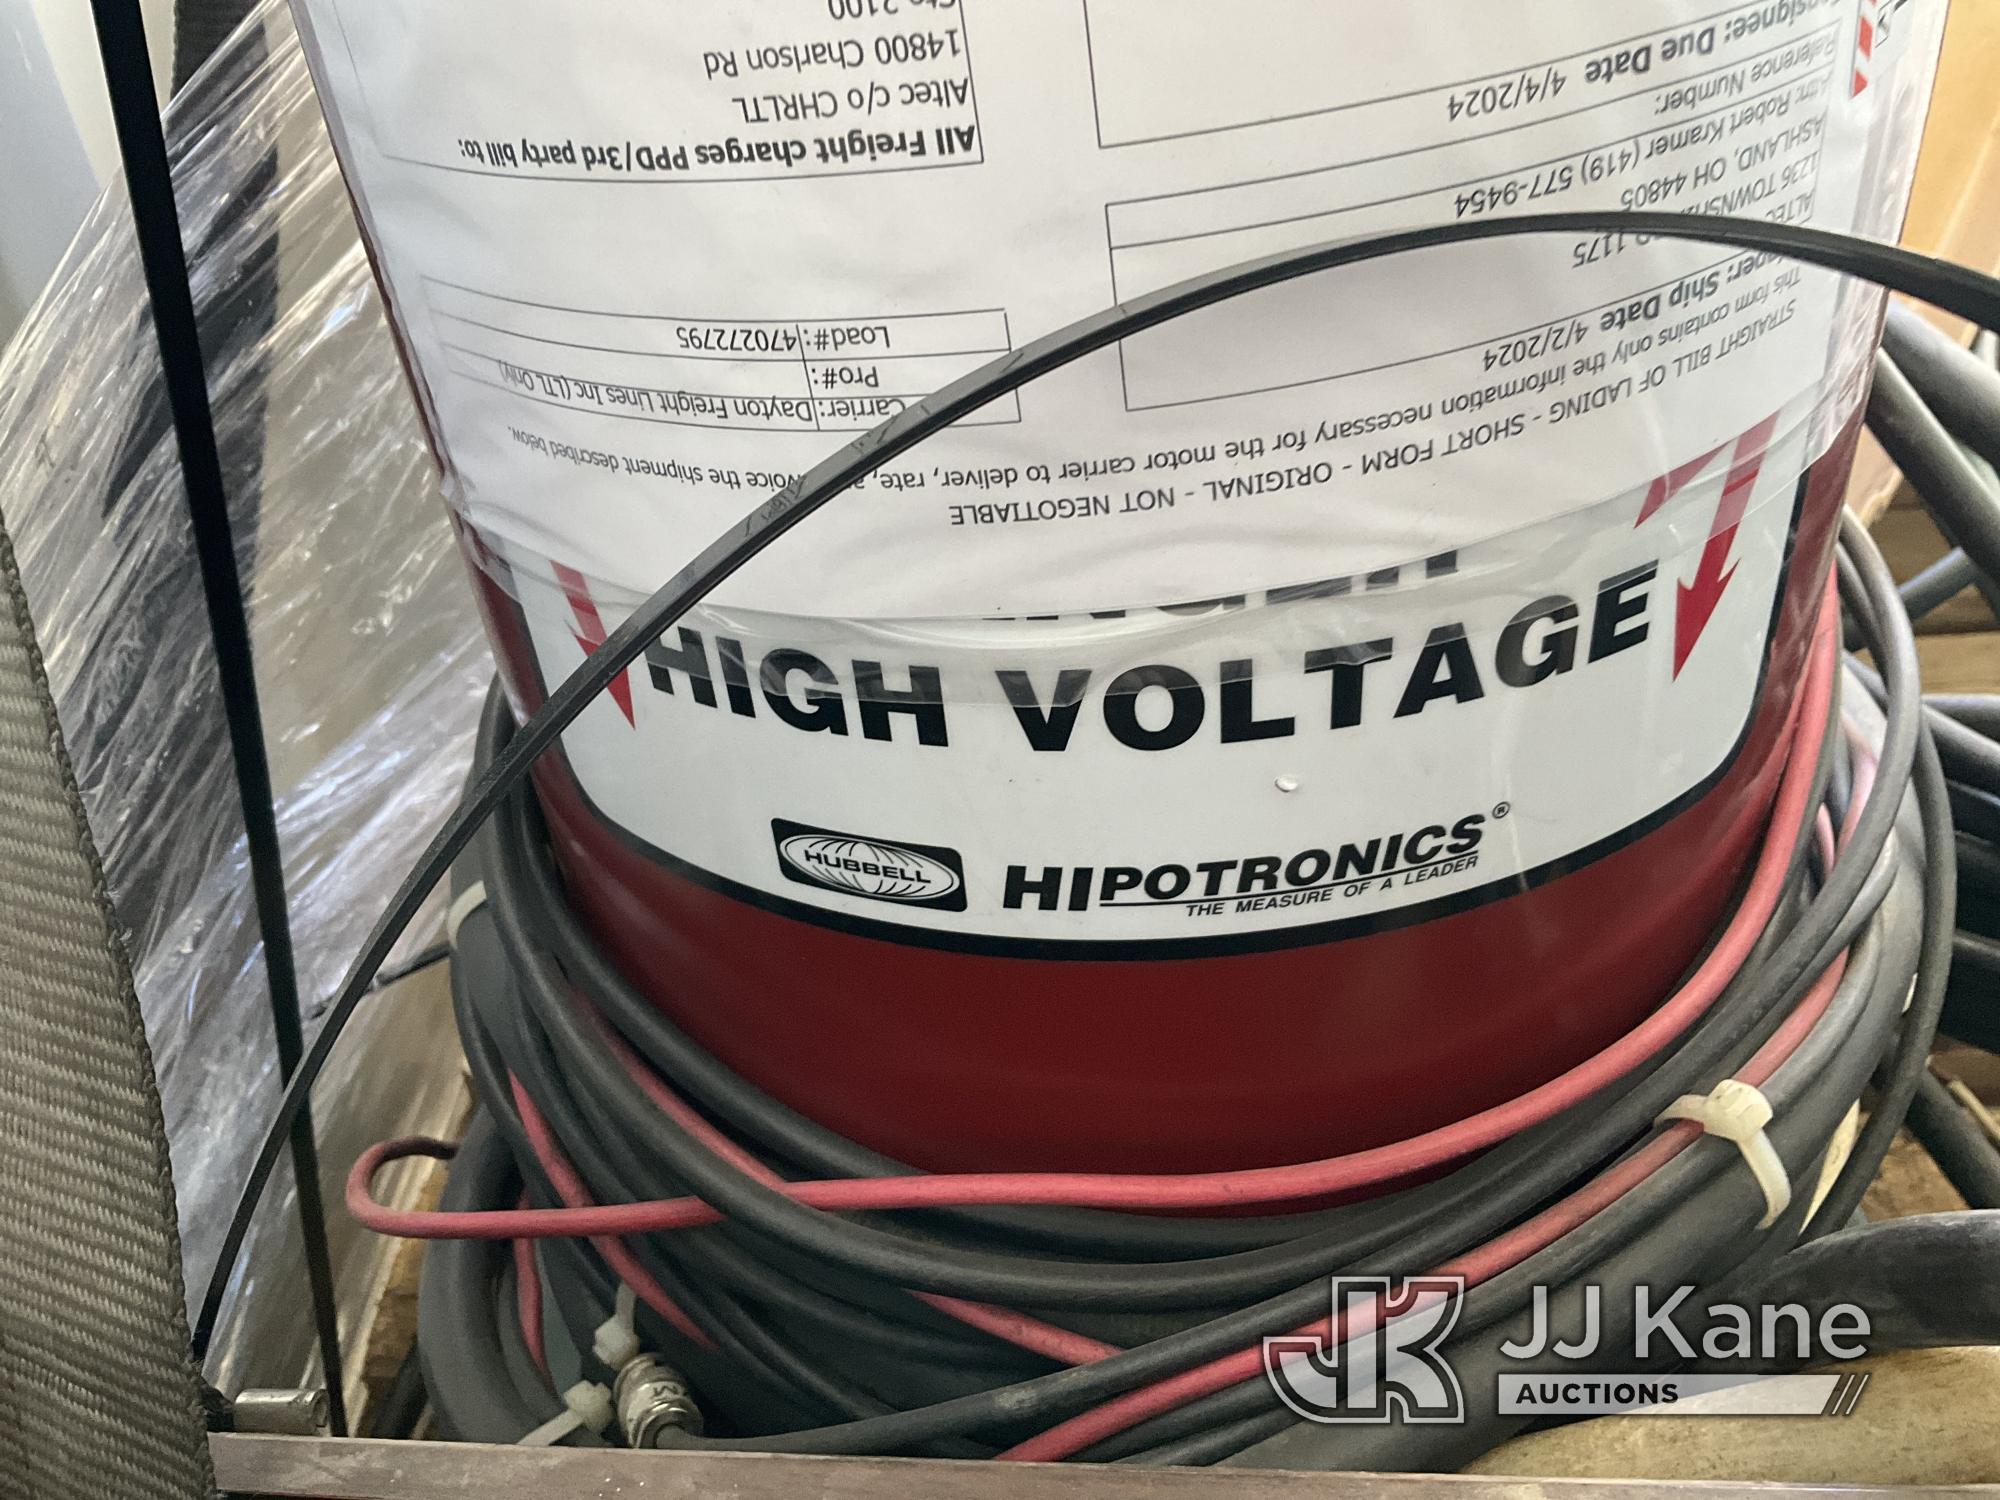 (Kansas City, MO) Hipotronics Model 100 HVT Dielectric Tester (Used) NOTE: This unit is being sold A